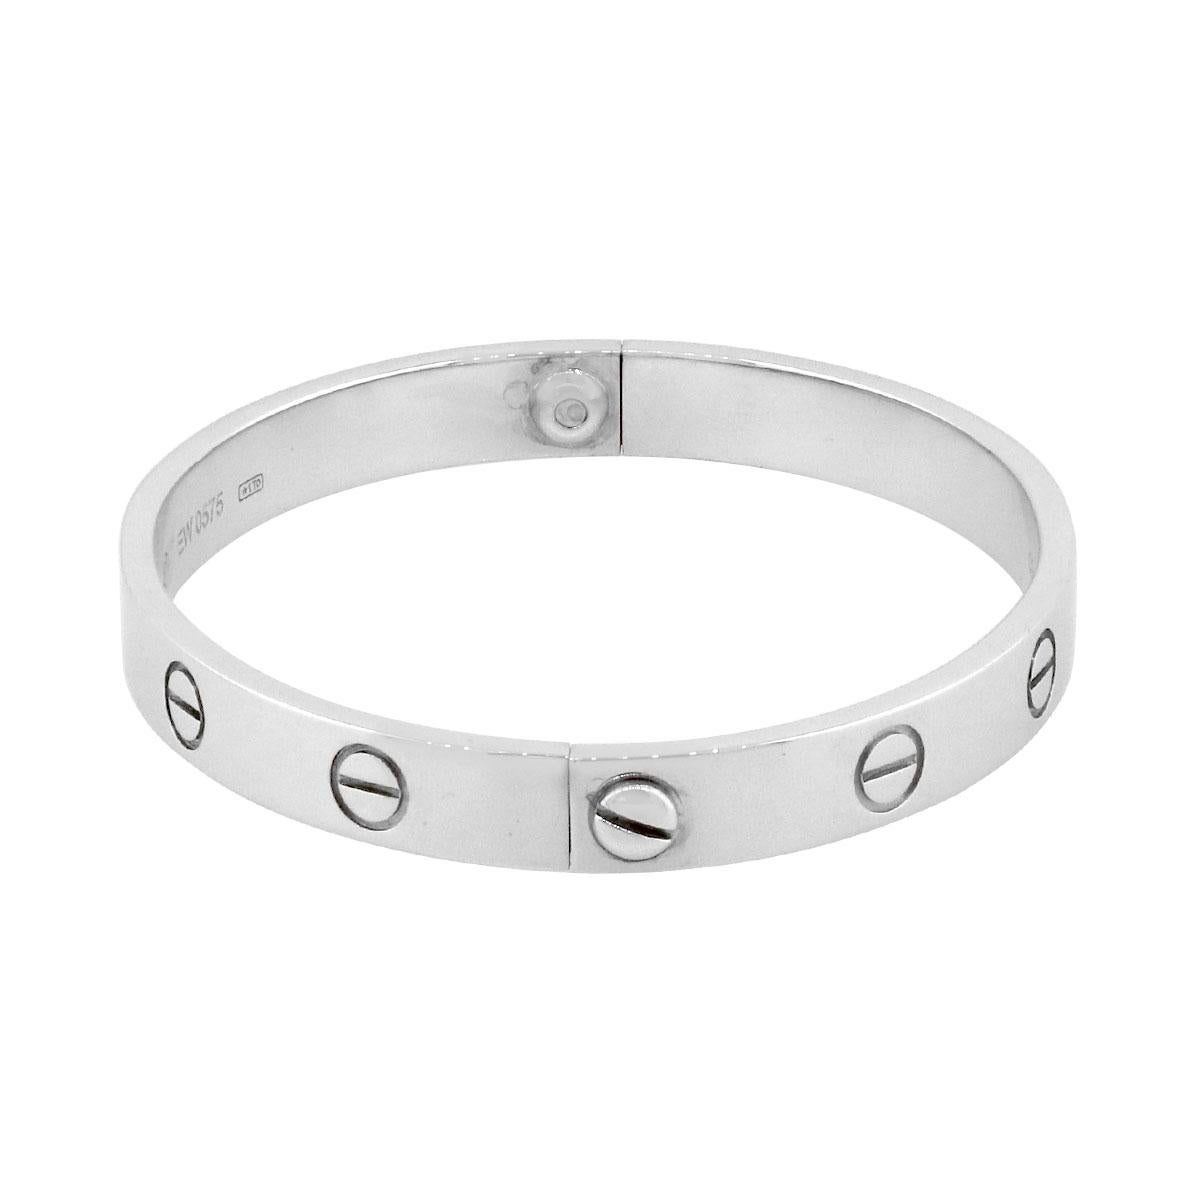 Designer: Cartier
Material: 18k White Gold
Style: White Gold LOVE Bracelet
Bangle Size: Size 16
Additional Details: This item includes Cartier papers and Cartier screwdriver!
SKU: G9437